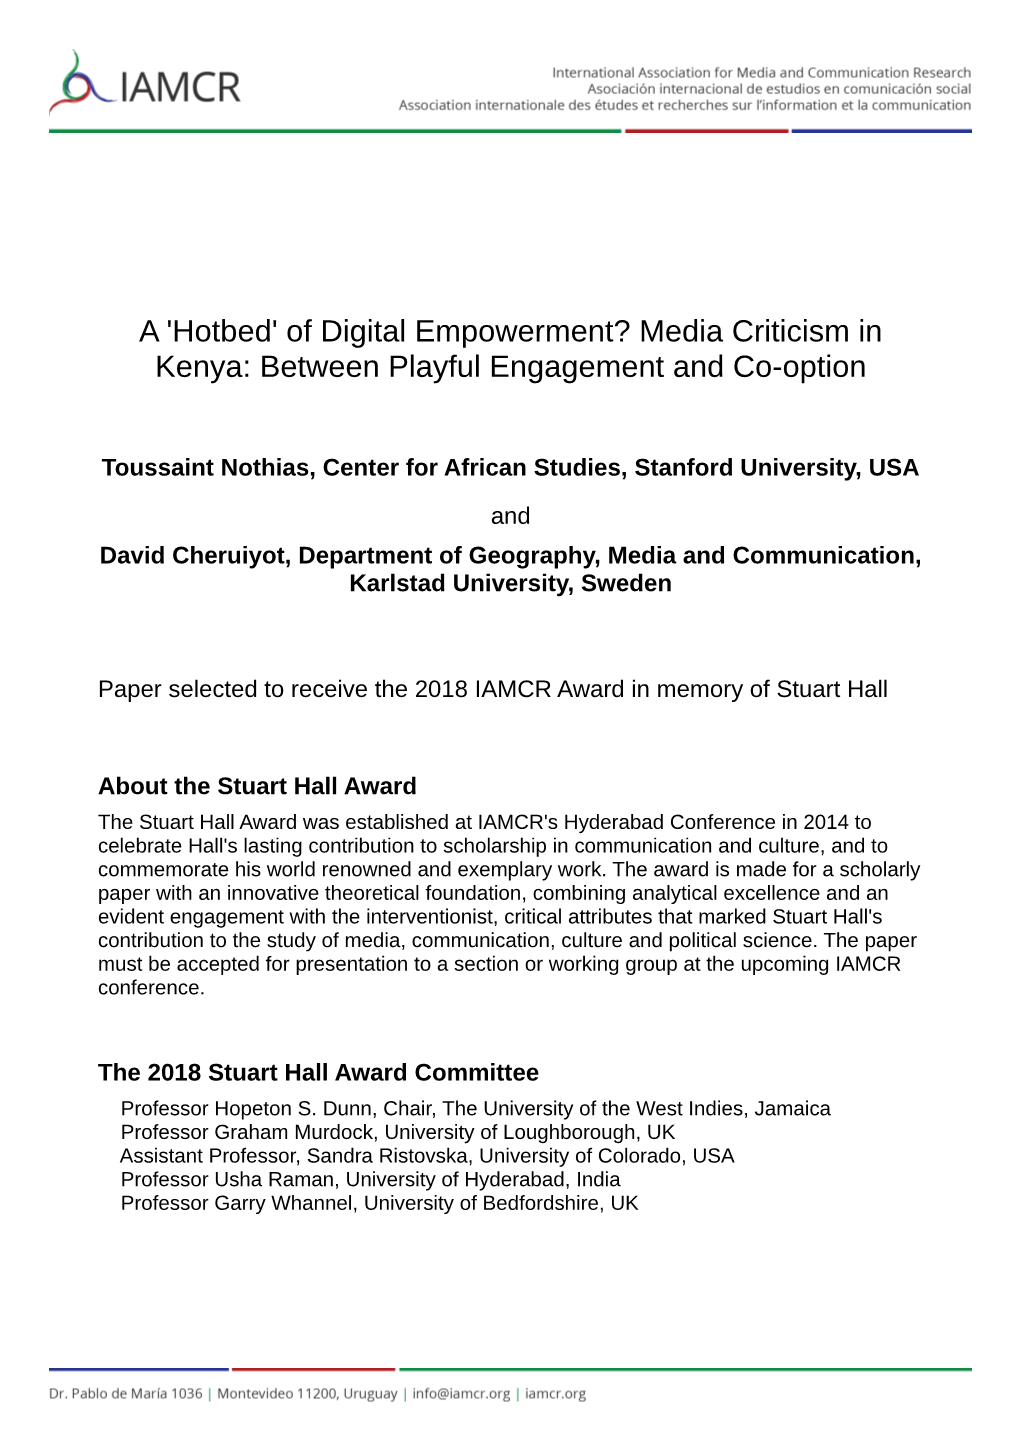 Media Criticism in Kenya: Between Playful Engagement and Co-Option